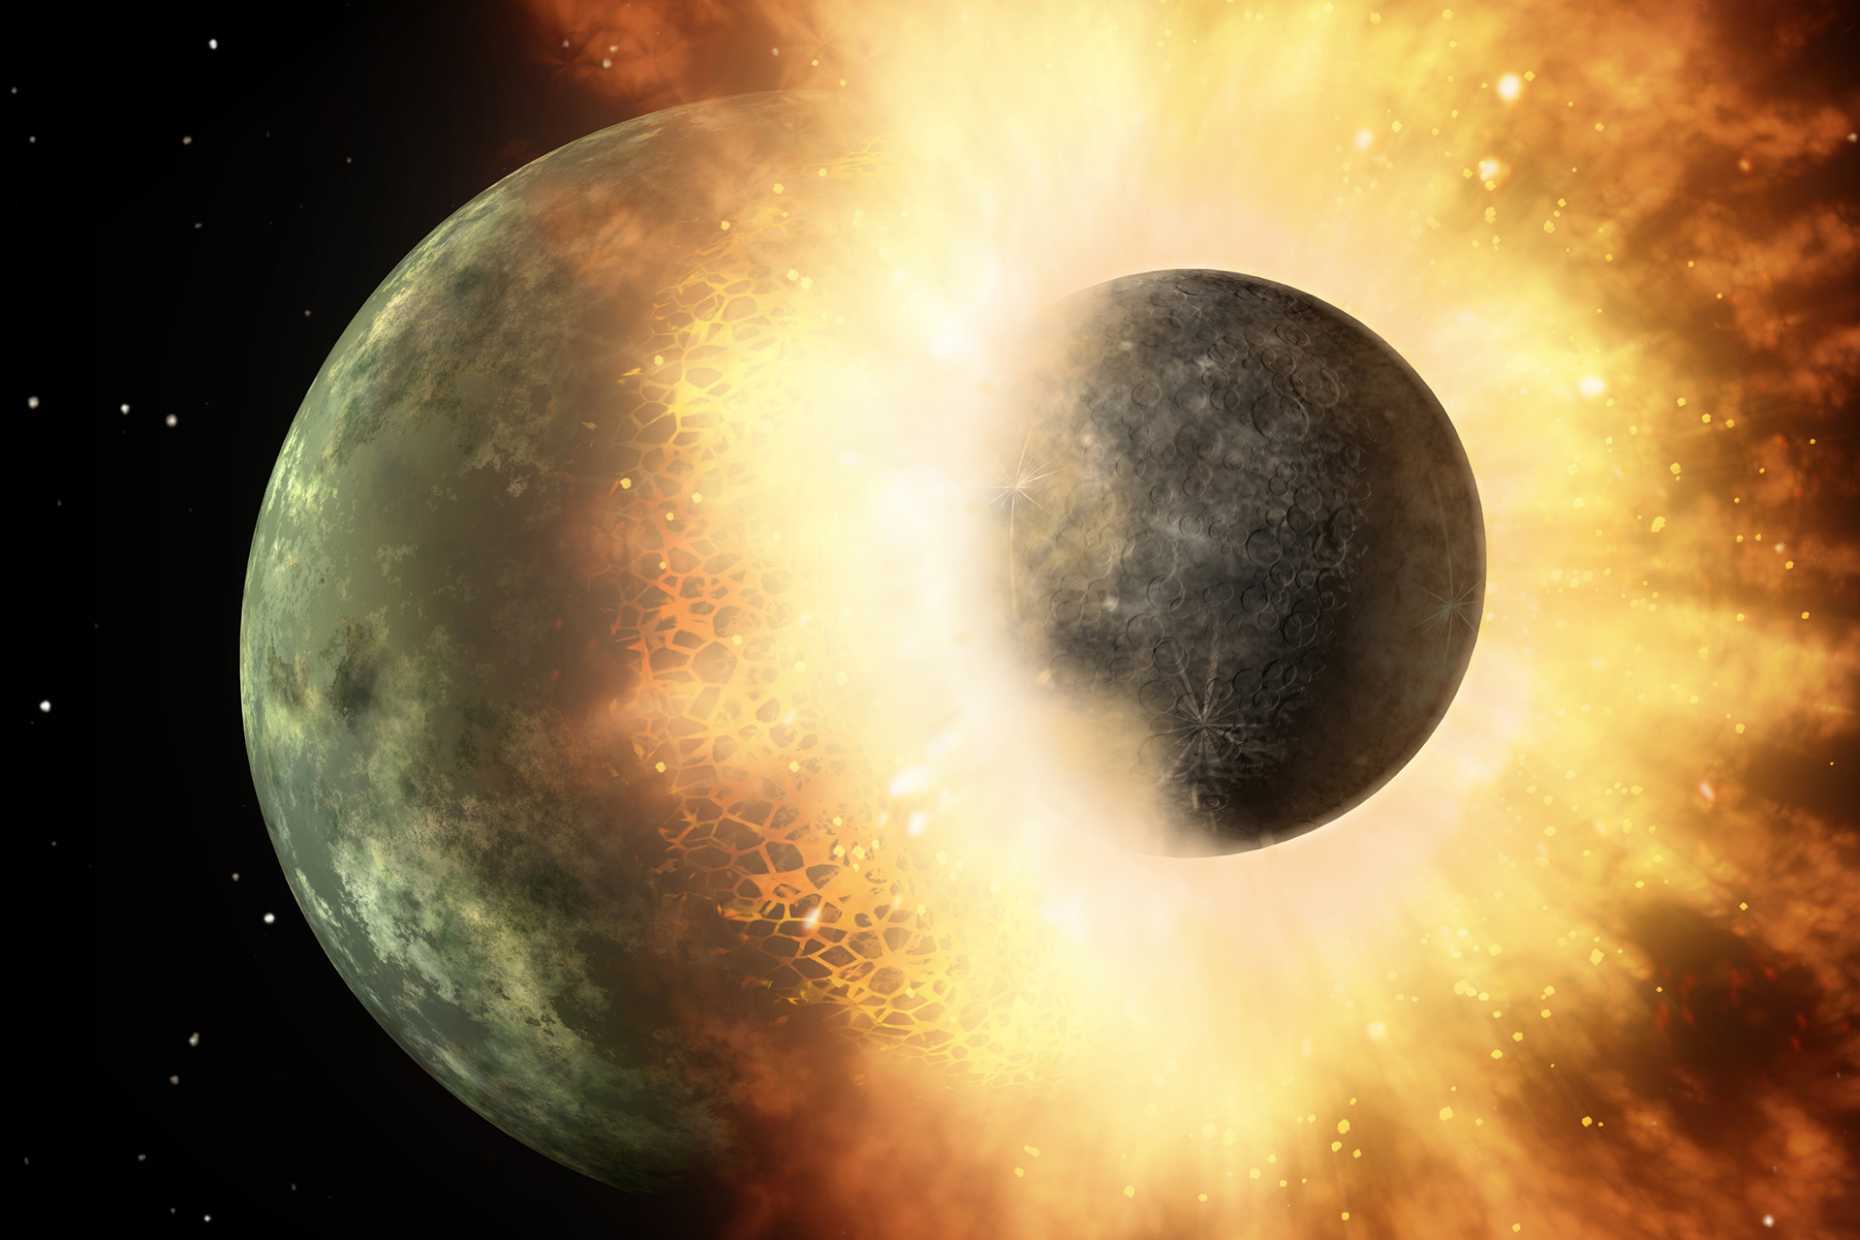 Enlarged view: The Moon was formed when the Earth collided with a smaller planet from the neighbourhood about 4.5 billion years ago. (Graphic: NASA)